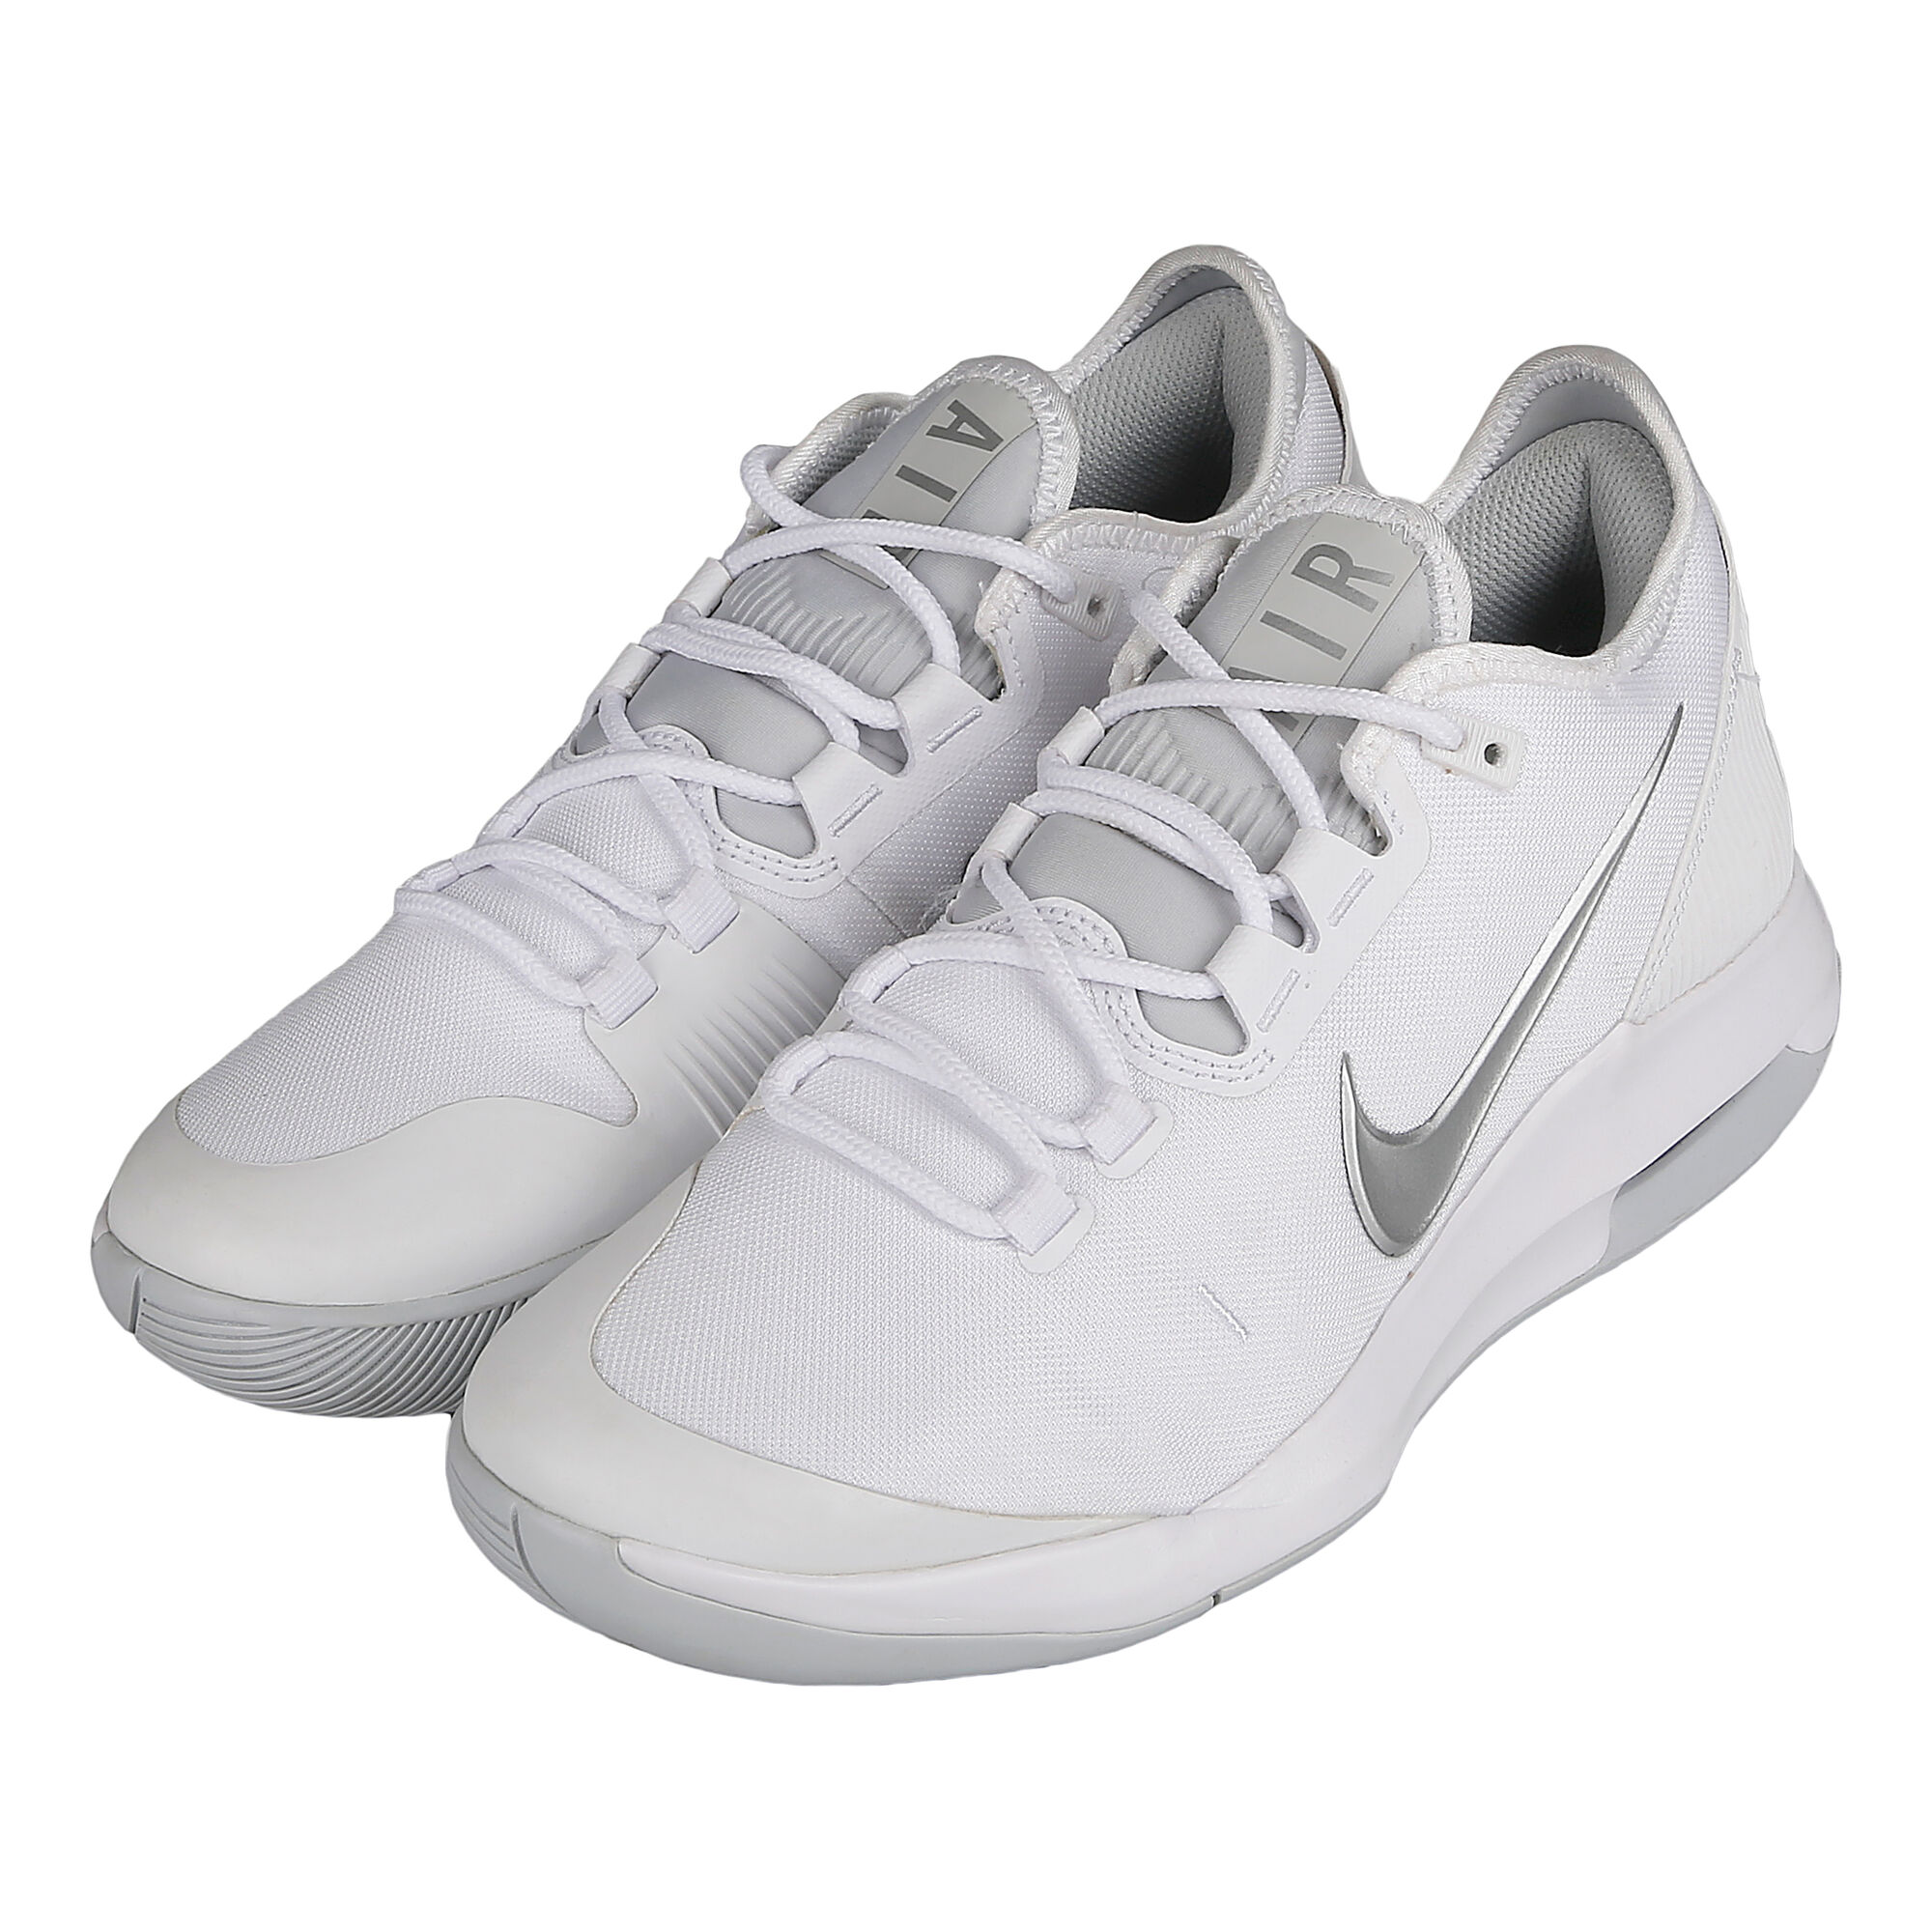 Buy Nike Air Max Wildcard All Court Shoe Women White, Silver online ...